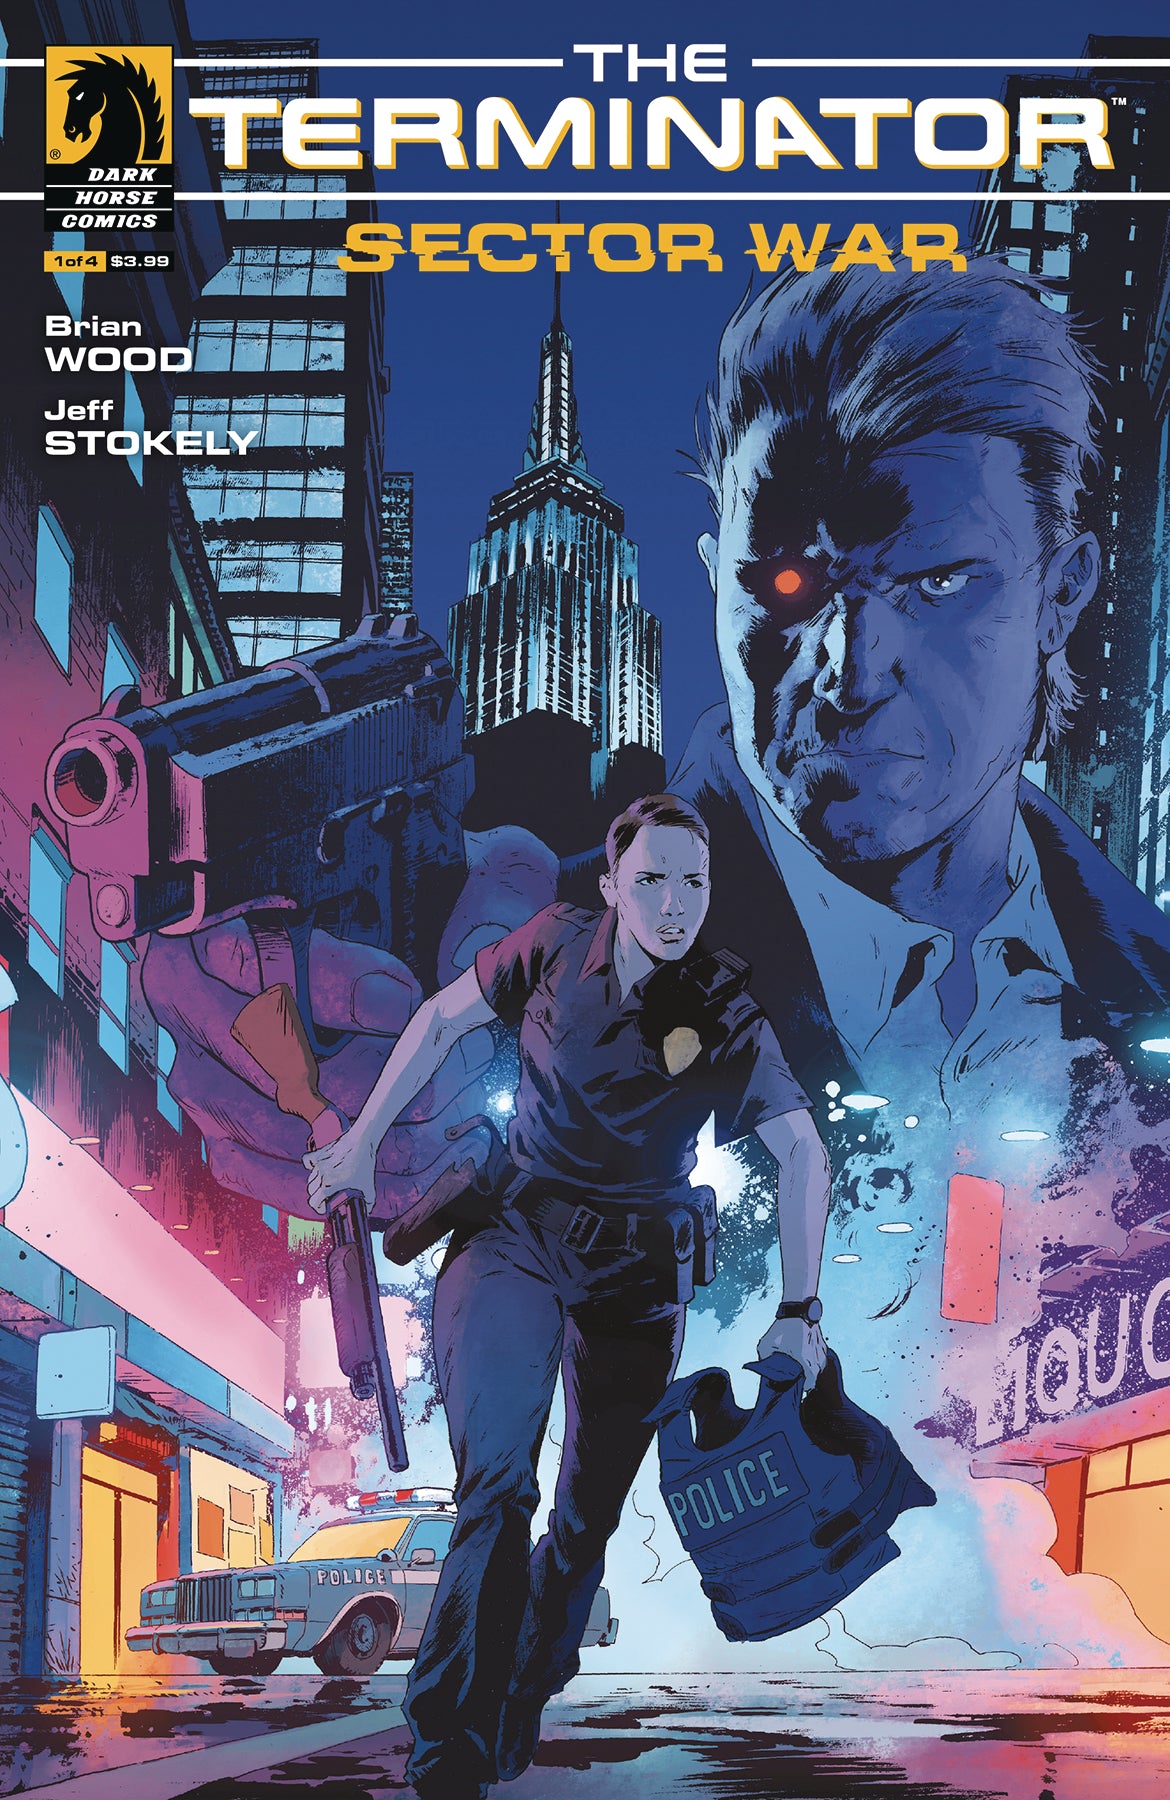 TERMINATOR SECTOR WAR #1 (OF 4) COVER